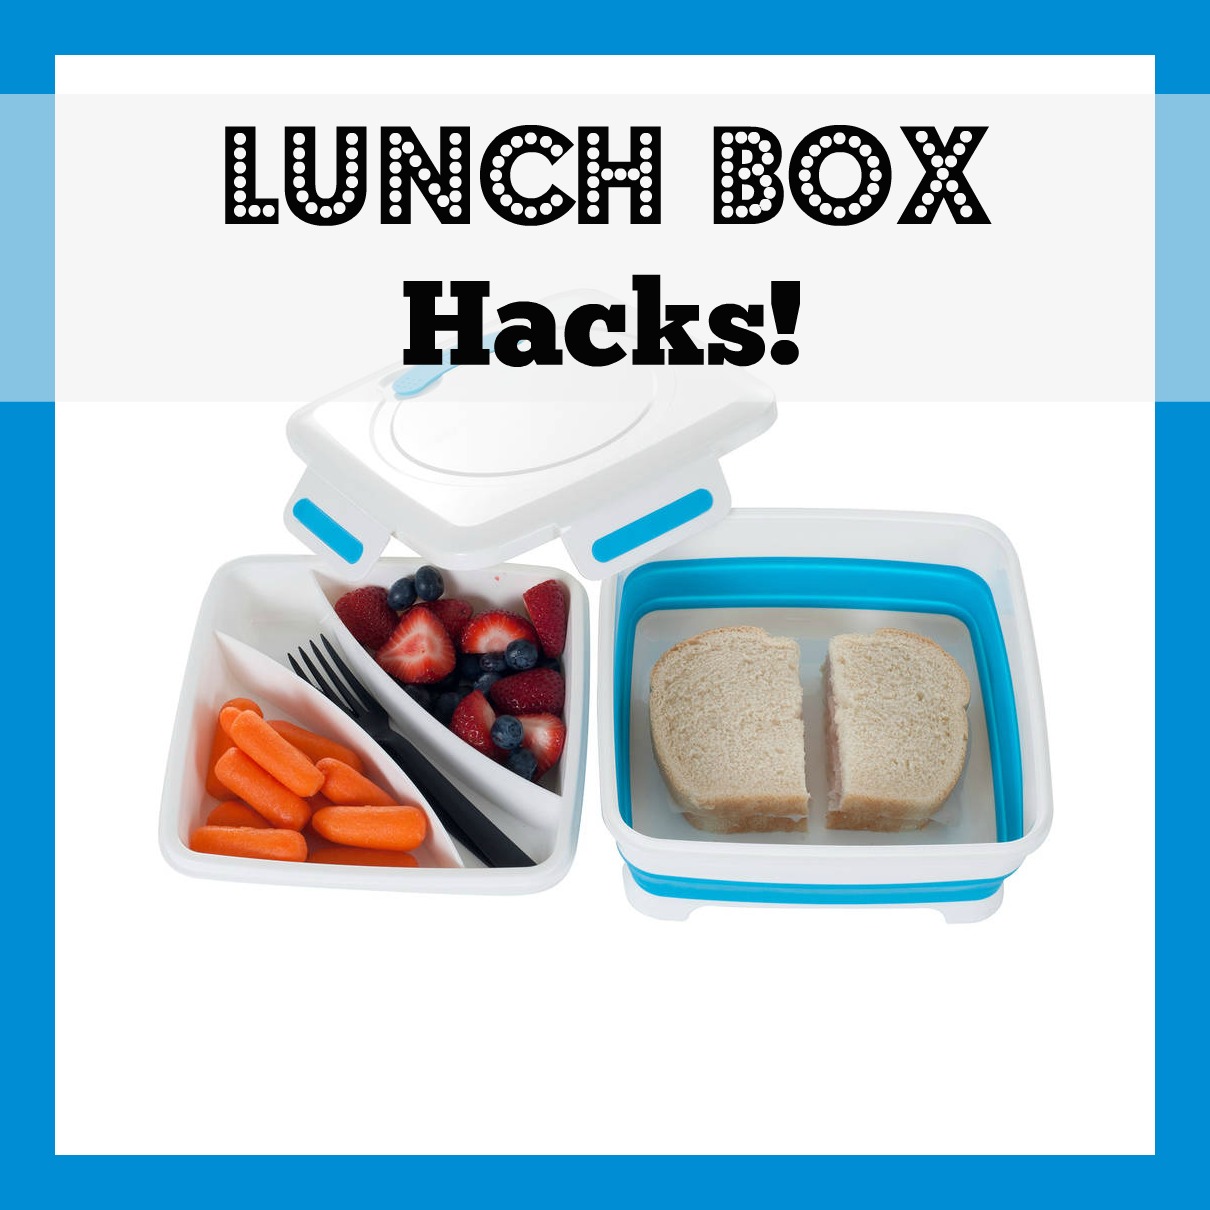 15 Back to School Lunch Box Tips to Help You Get Started on The Right Foot!